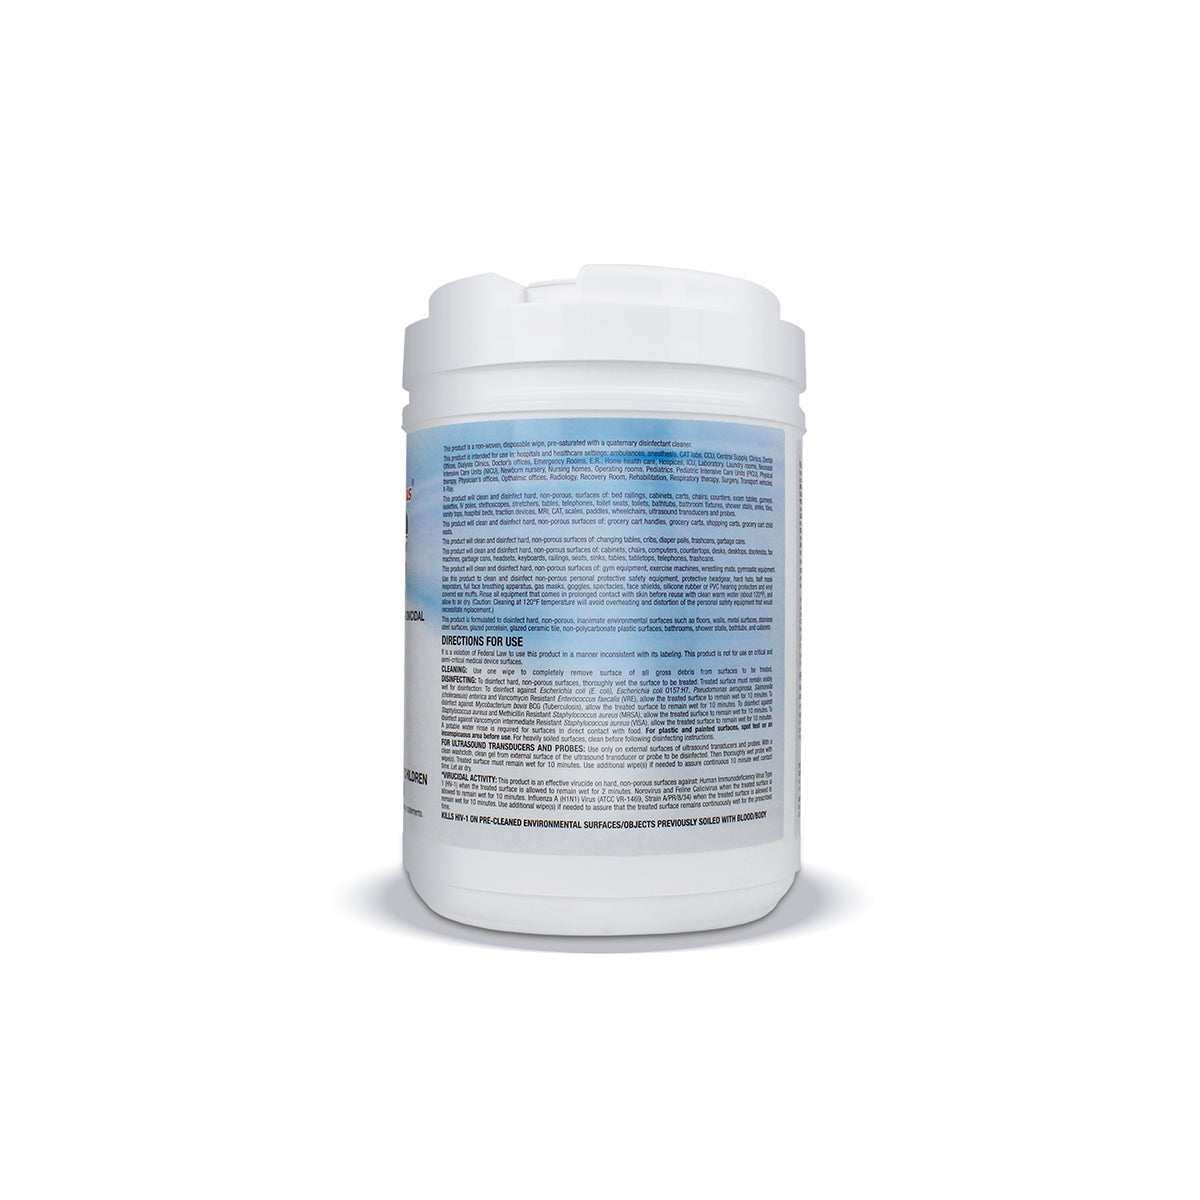 SafeTec - SaniZide Plus® Surface Disinfectant Wipes - 160ct. Canister data-zoom=